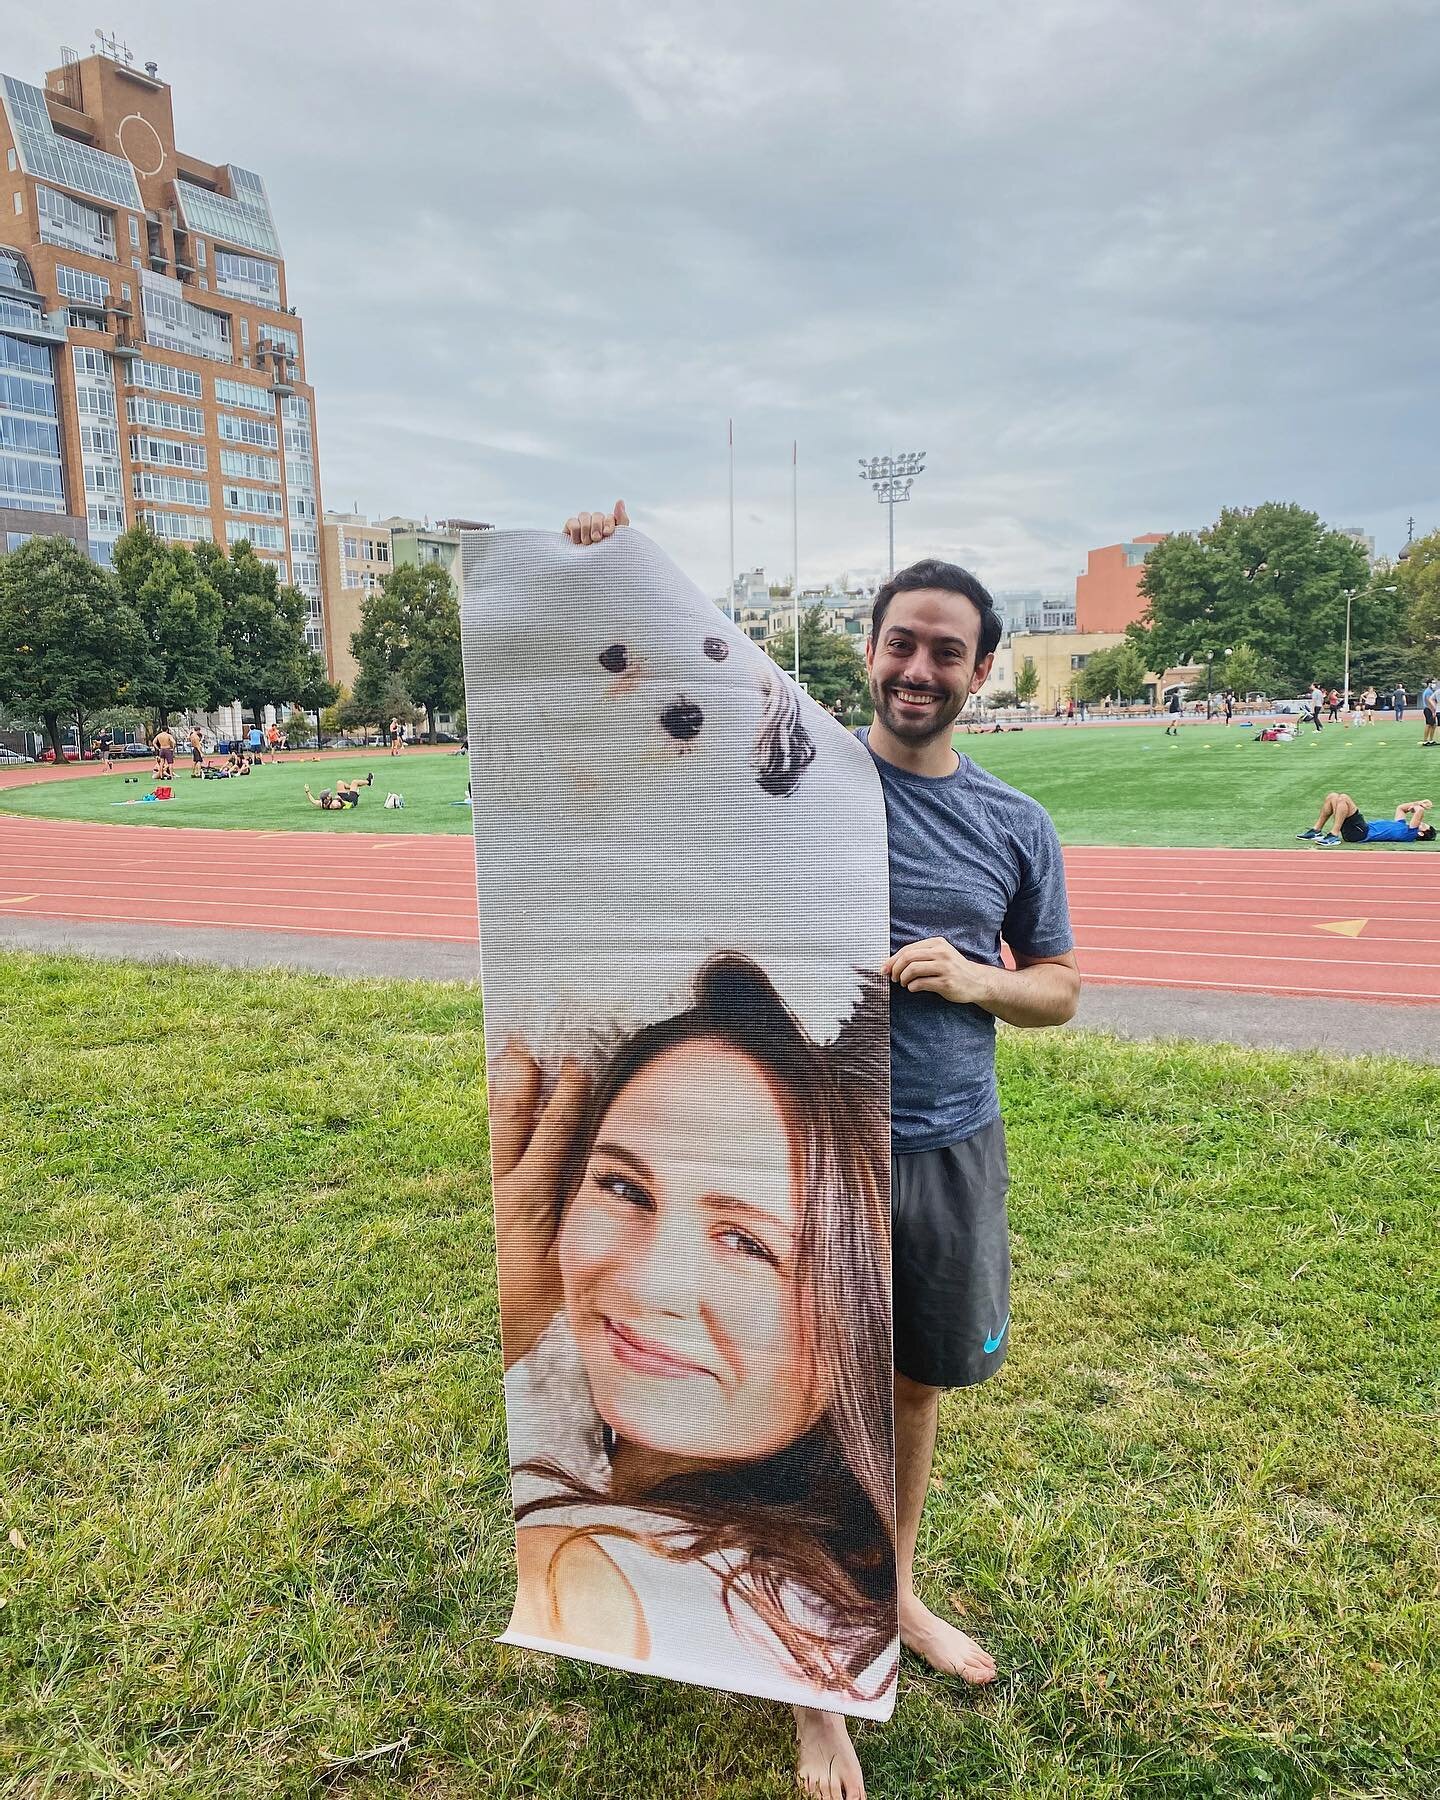 *YOGA MAT OF ME AND #dognotbourbon  BY @eeejay8 WHAT A GIFT FOR US ALL*
𝕪𝕠𝕘𝕒:: DM me for park class info / Zoom link ::𝕪𝕠𝕘𝕒
WED) 630p Yin Yoga on ZOOM 
FRI)  11a Yoga on ZOOM 
SUN)  10a Yoga in McCarren Park 🌲 
______________________________